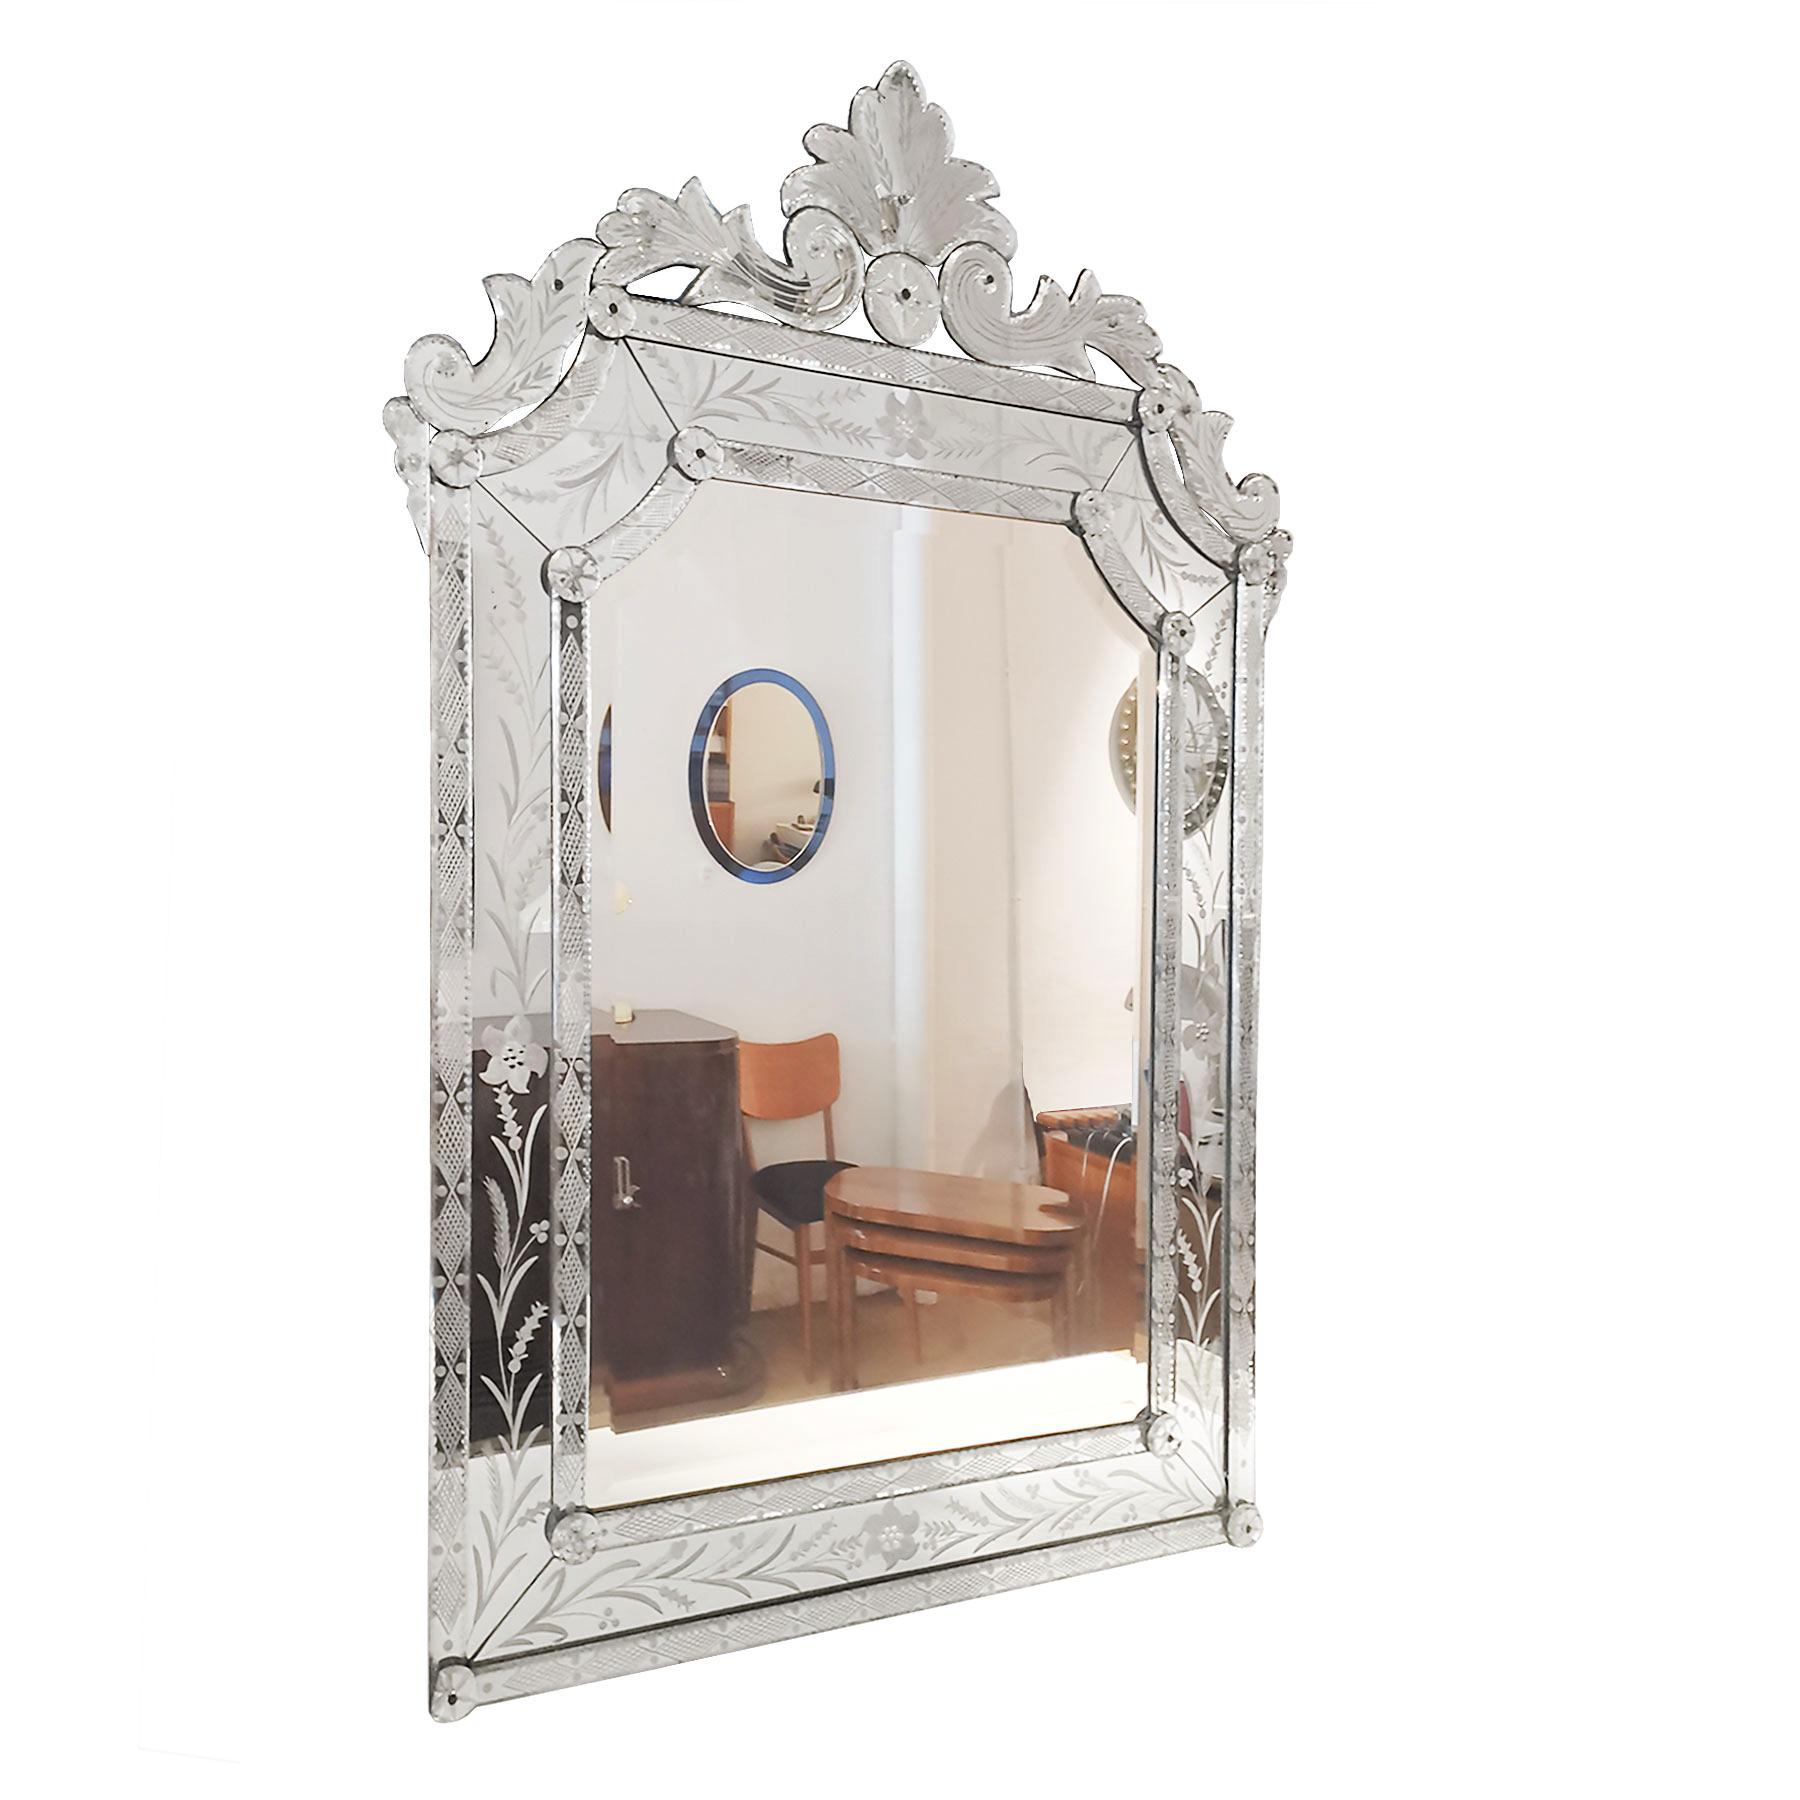 Neoclassical beveled mirror with carved and acid engraved mirror frame, floral and vegetal patterns (Some missing glass screw heads),

Spain, Majorca, circa 1940.